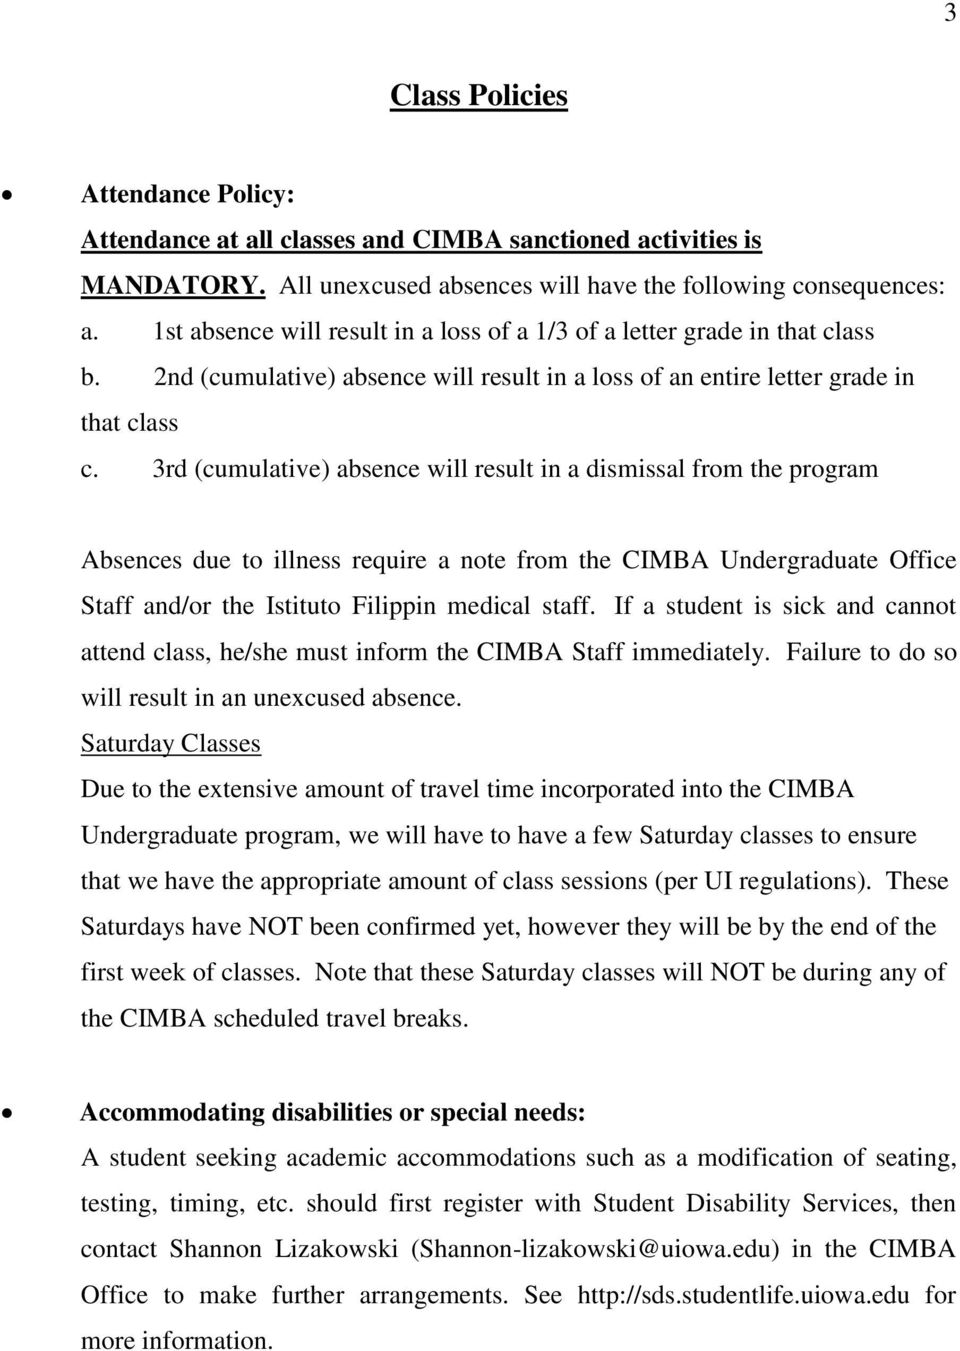 3rd (cumulative) absence will result in a dismissal from the program Absences due to illness require a note from the CIMBA Undergraduate Office Staff and/or the Istituto Filippin medical staff.